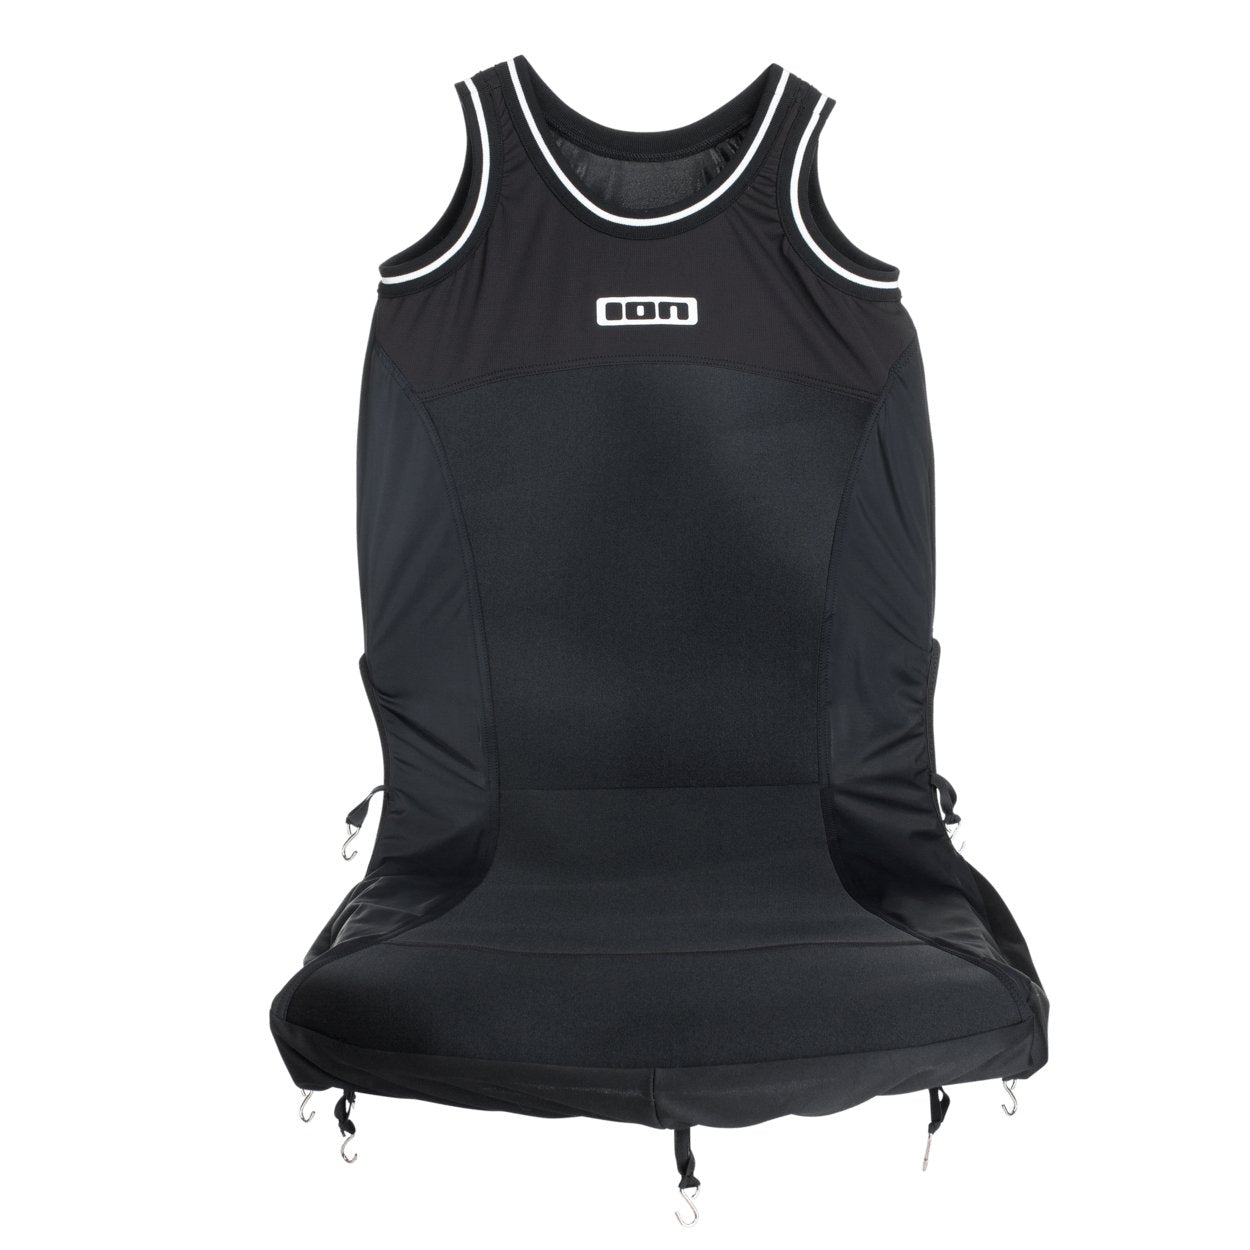 ION Tank Top Seat Cover 2022 - Worthing Watersports - 9008415890231 - Accessories - ION Water